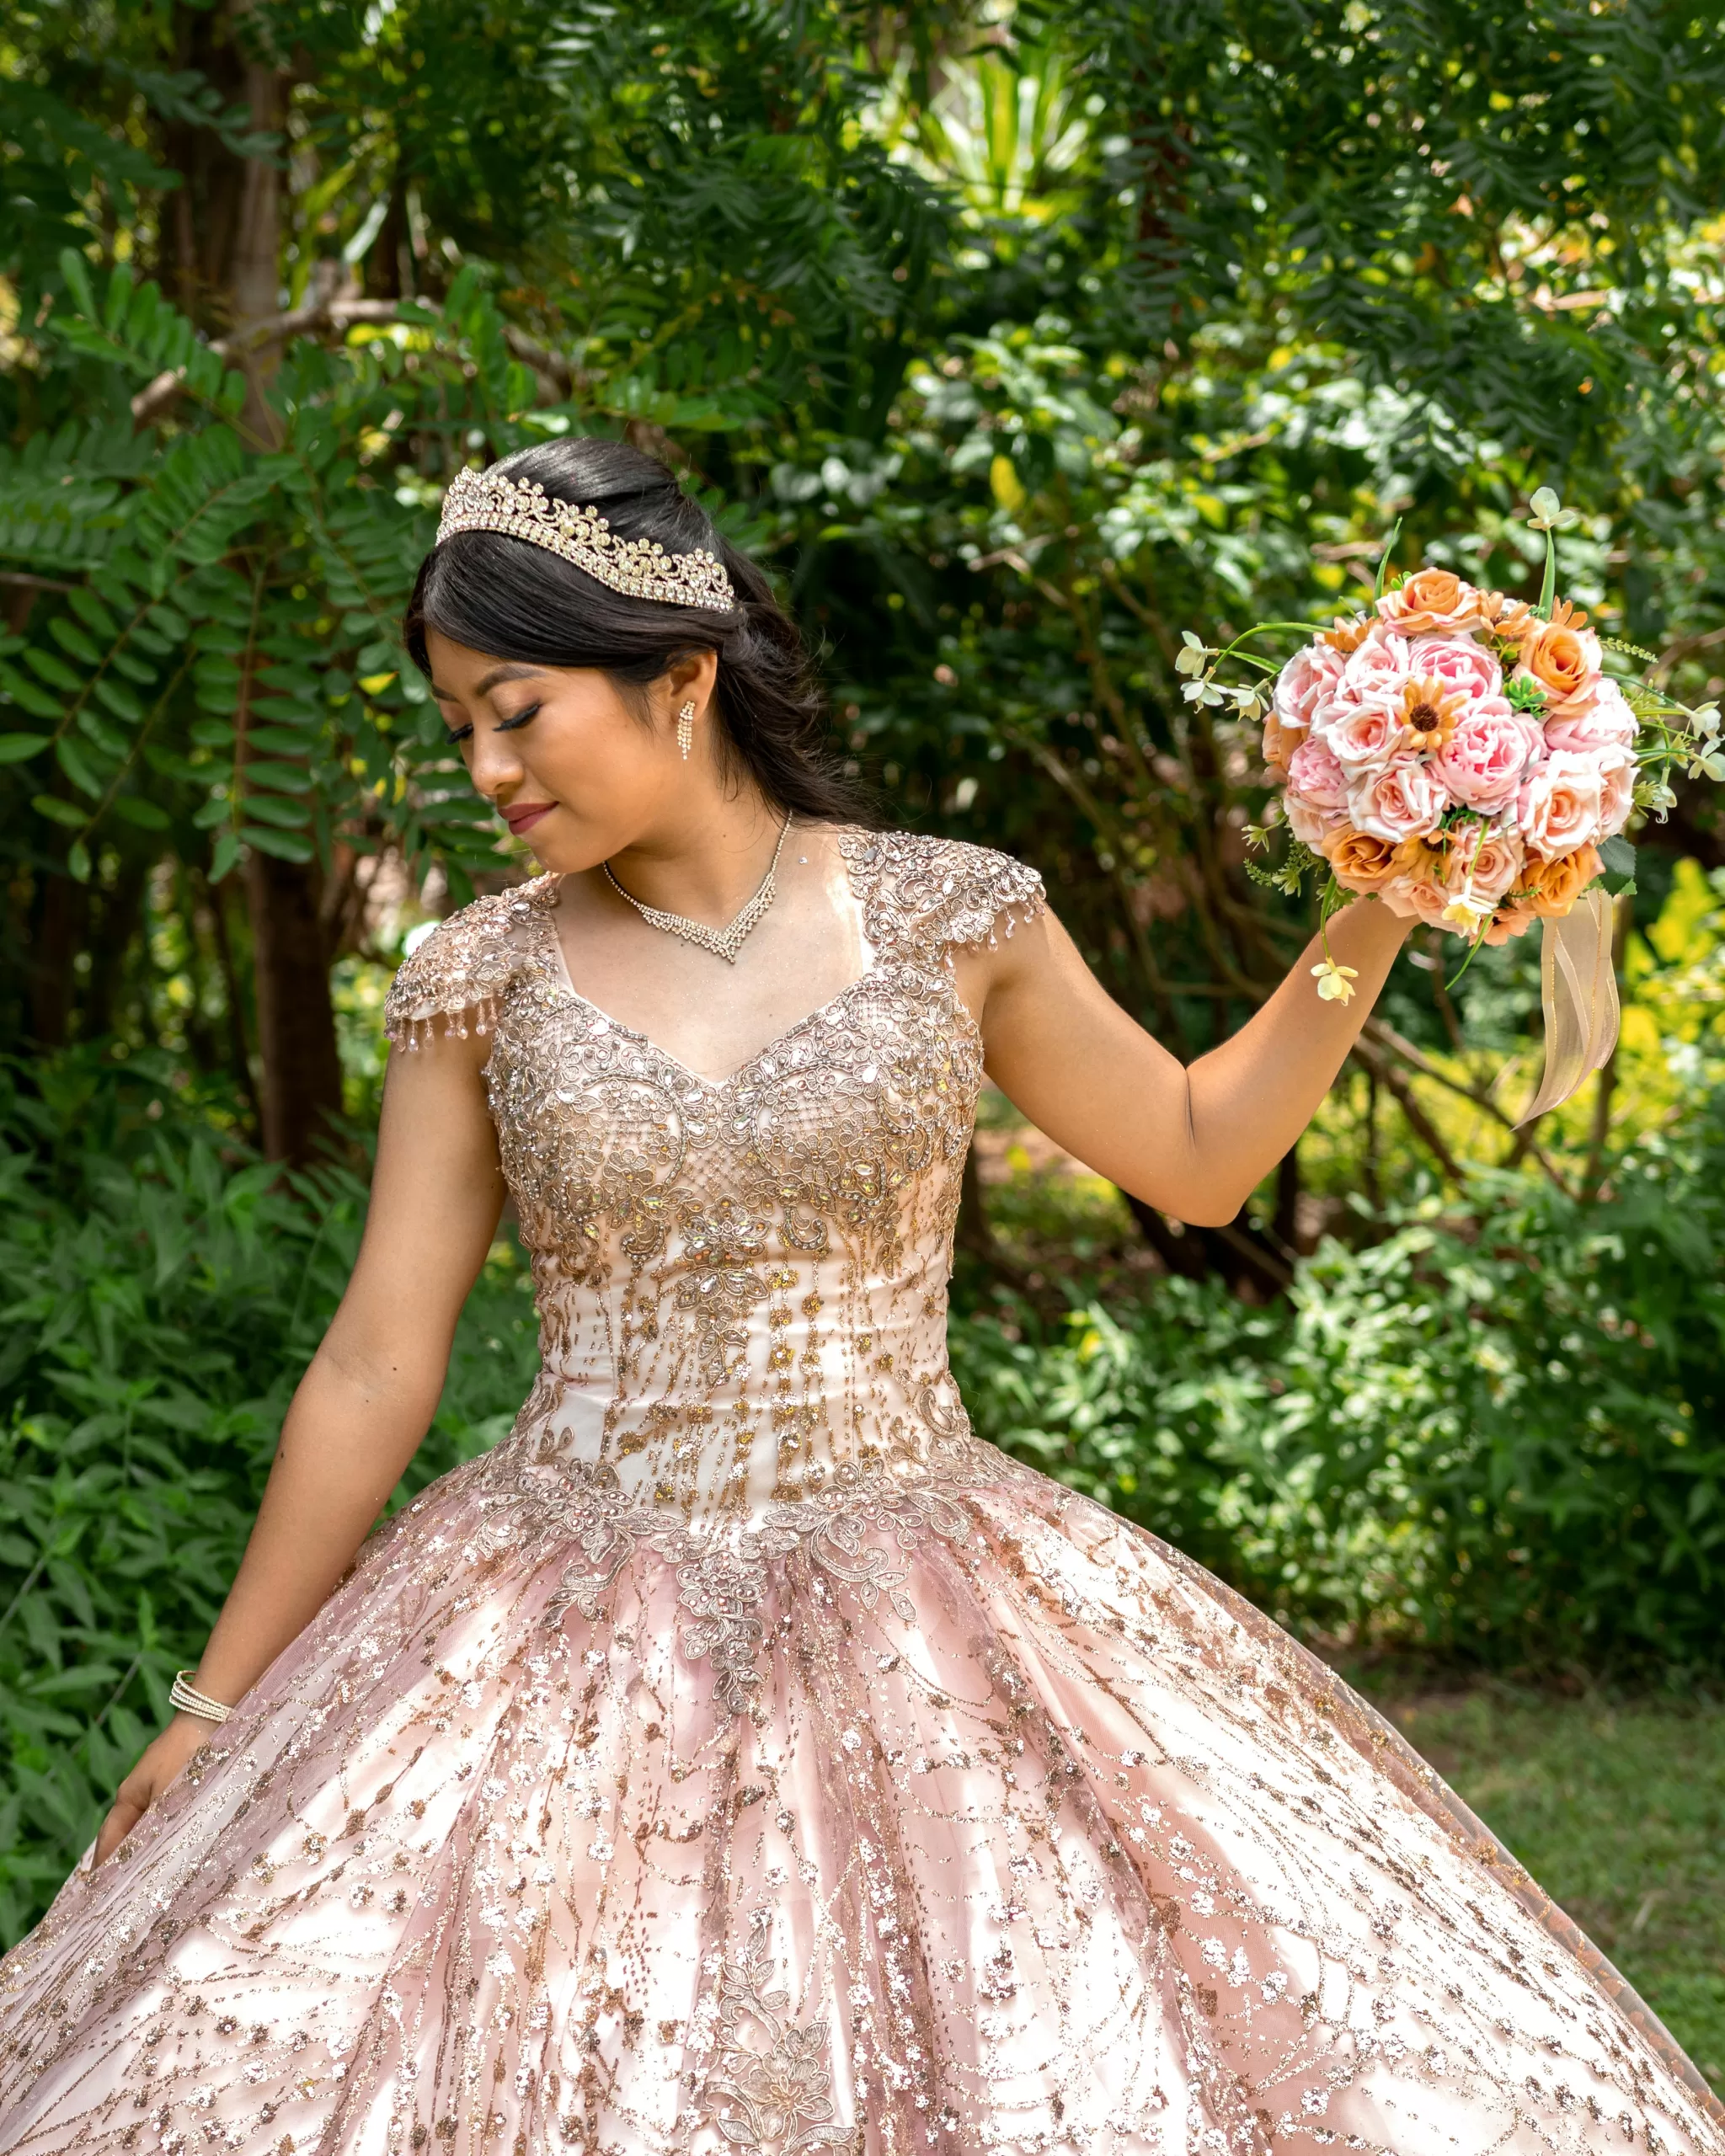 7 Beautiful Quinceanera Bouquets To Choose From | Fashion | Elle Blonde Luxury Lifestyle Destination Blog